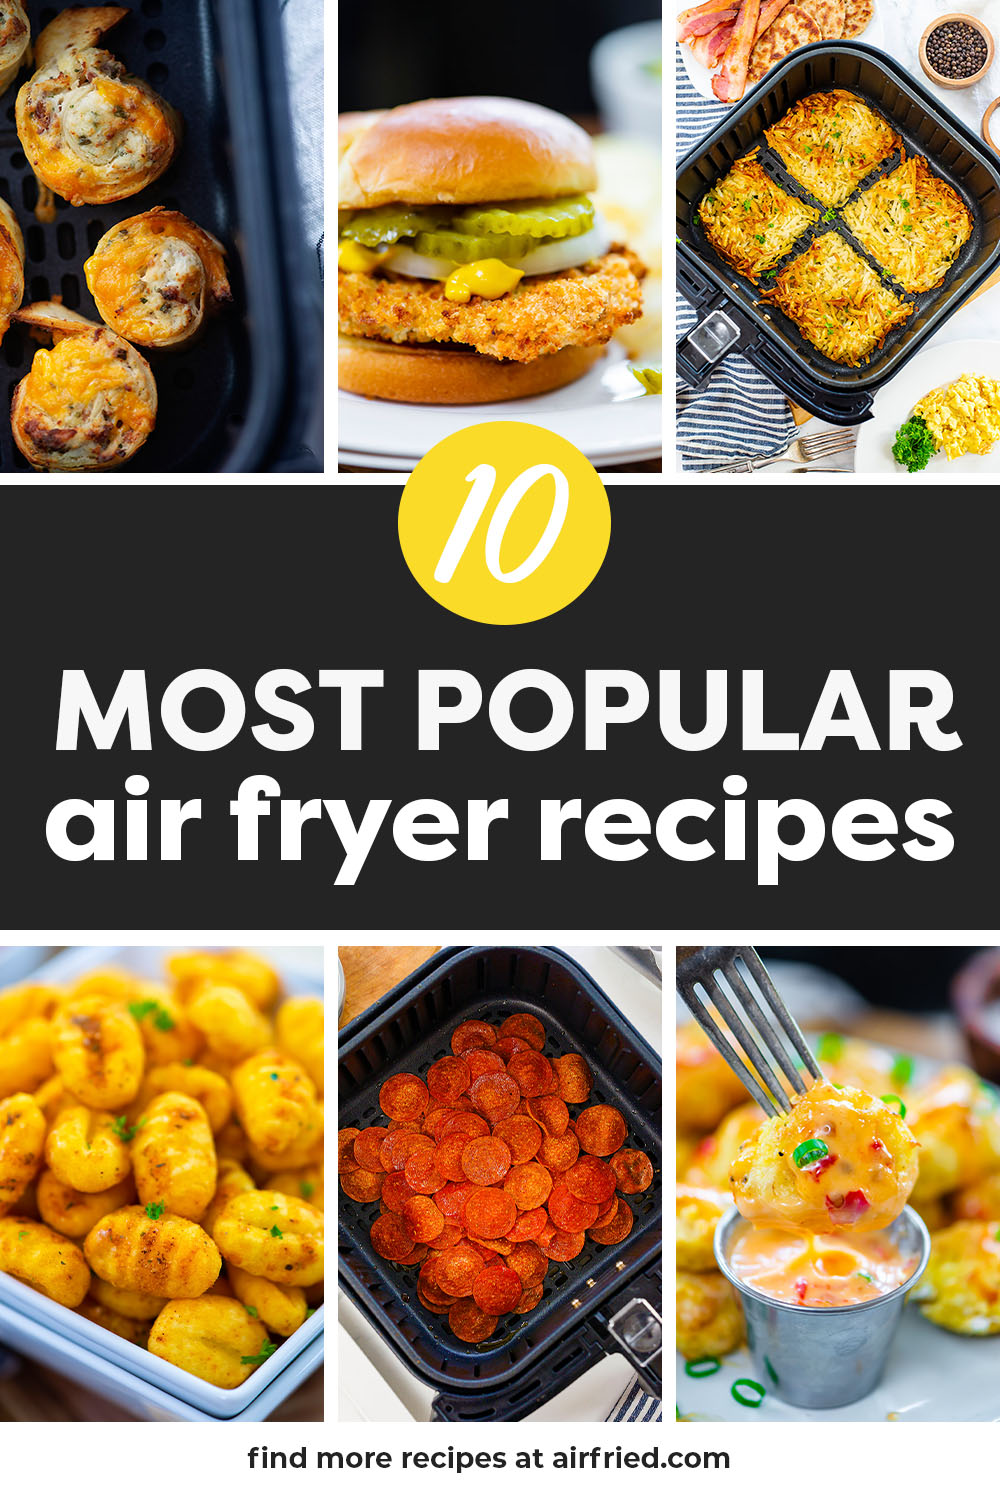 The 100 Best Air-Fryer Recipes You Need to Try in 2023